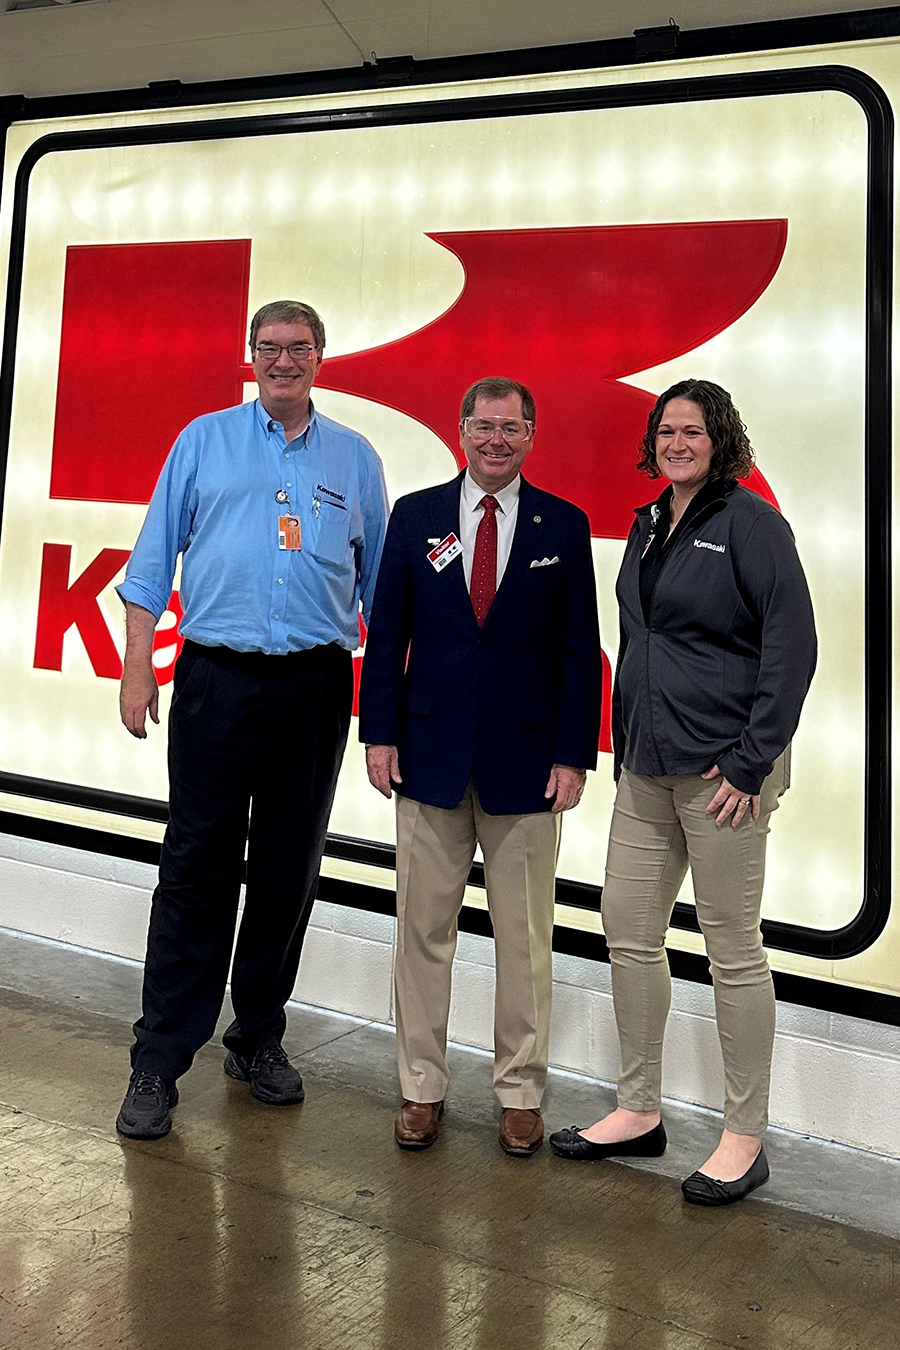 Pictured left to right are Tim Melvin, manager of human resources at Kawasaki; Northwest President Dr. Lance Tatum and Brittney Langston, assistant manager of human resources at Kawasaki, as Tatum toured the Maryville manufacturing facility this spring. (Submitted photo)